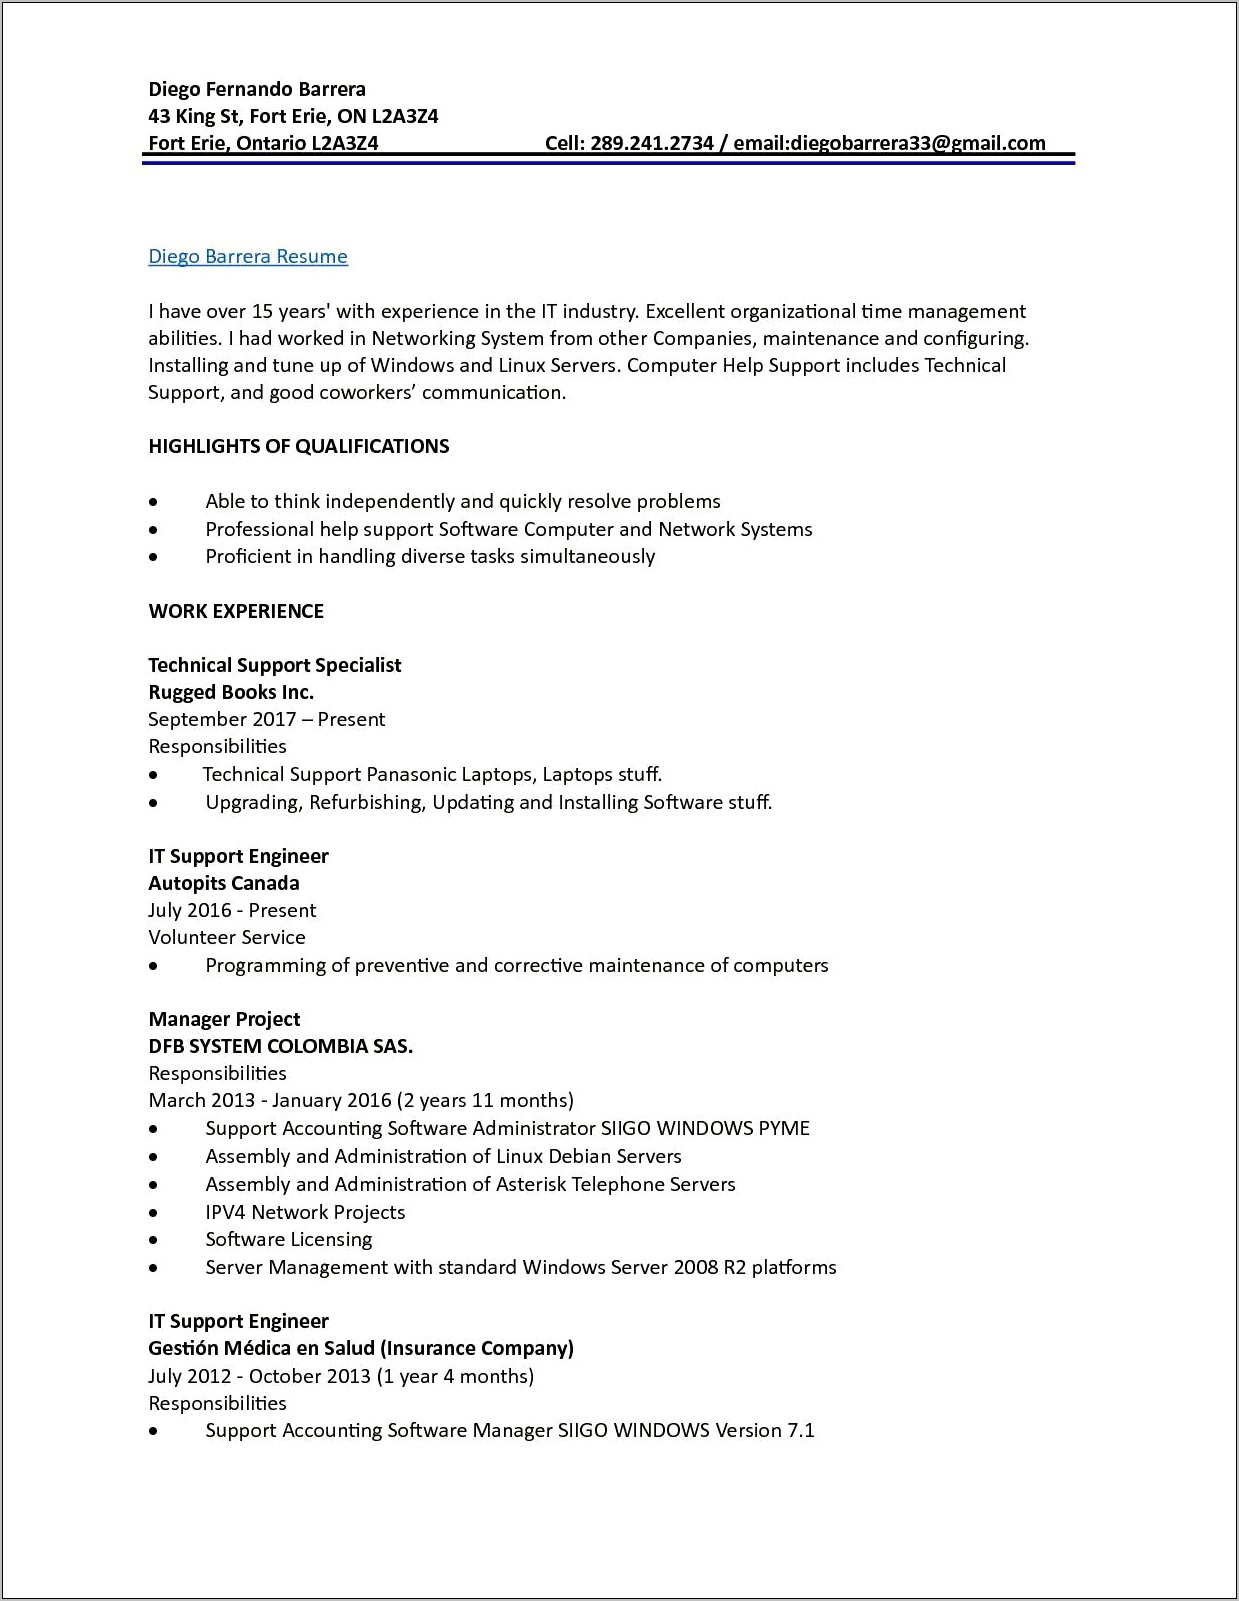 Resume For 1 Year Experience In Technical Support